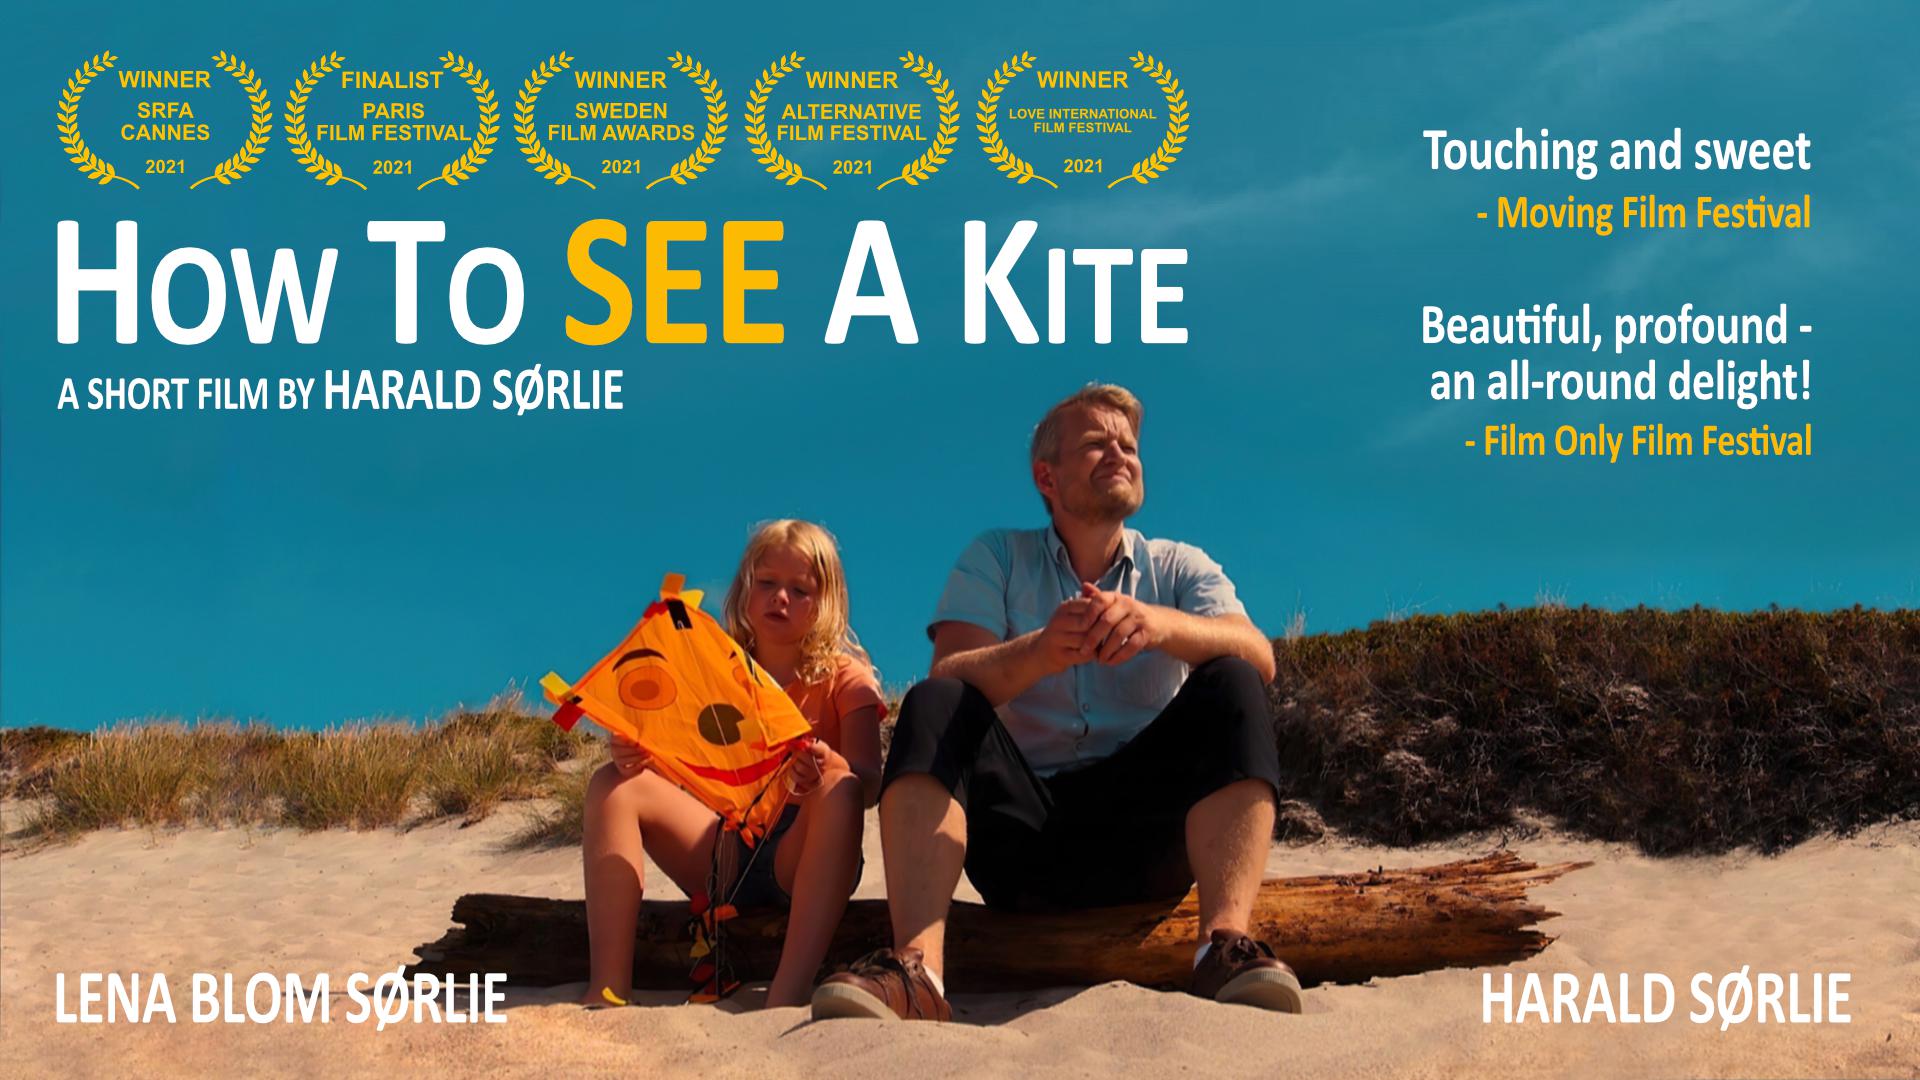 How to See a Kite